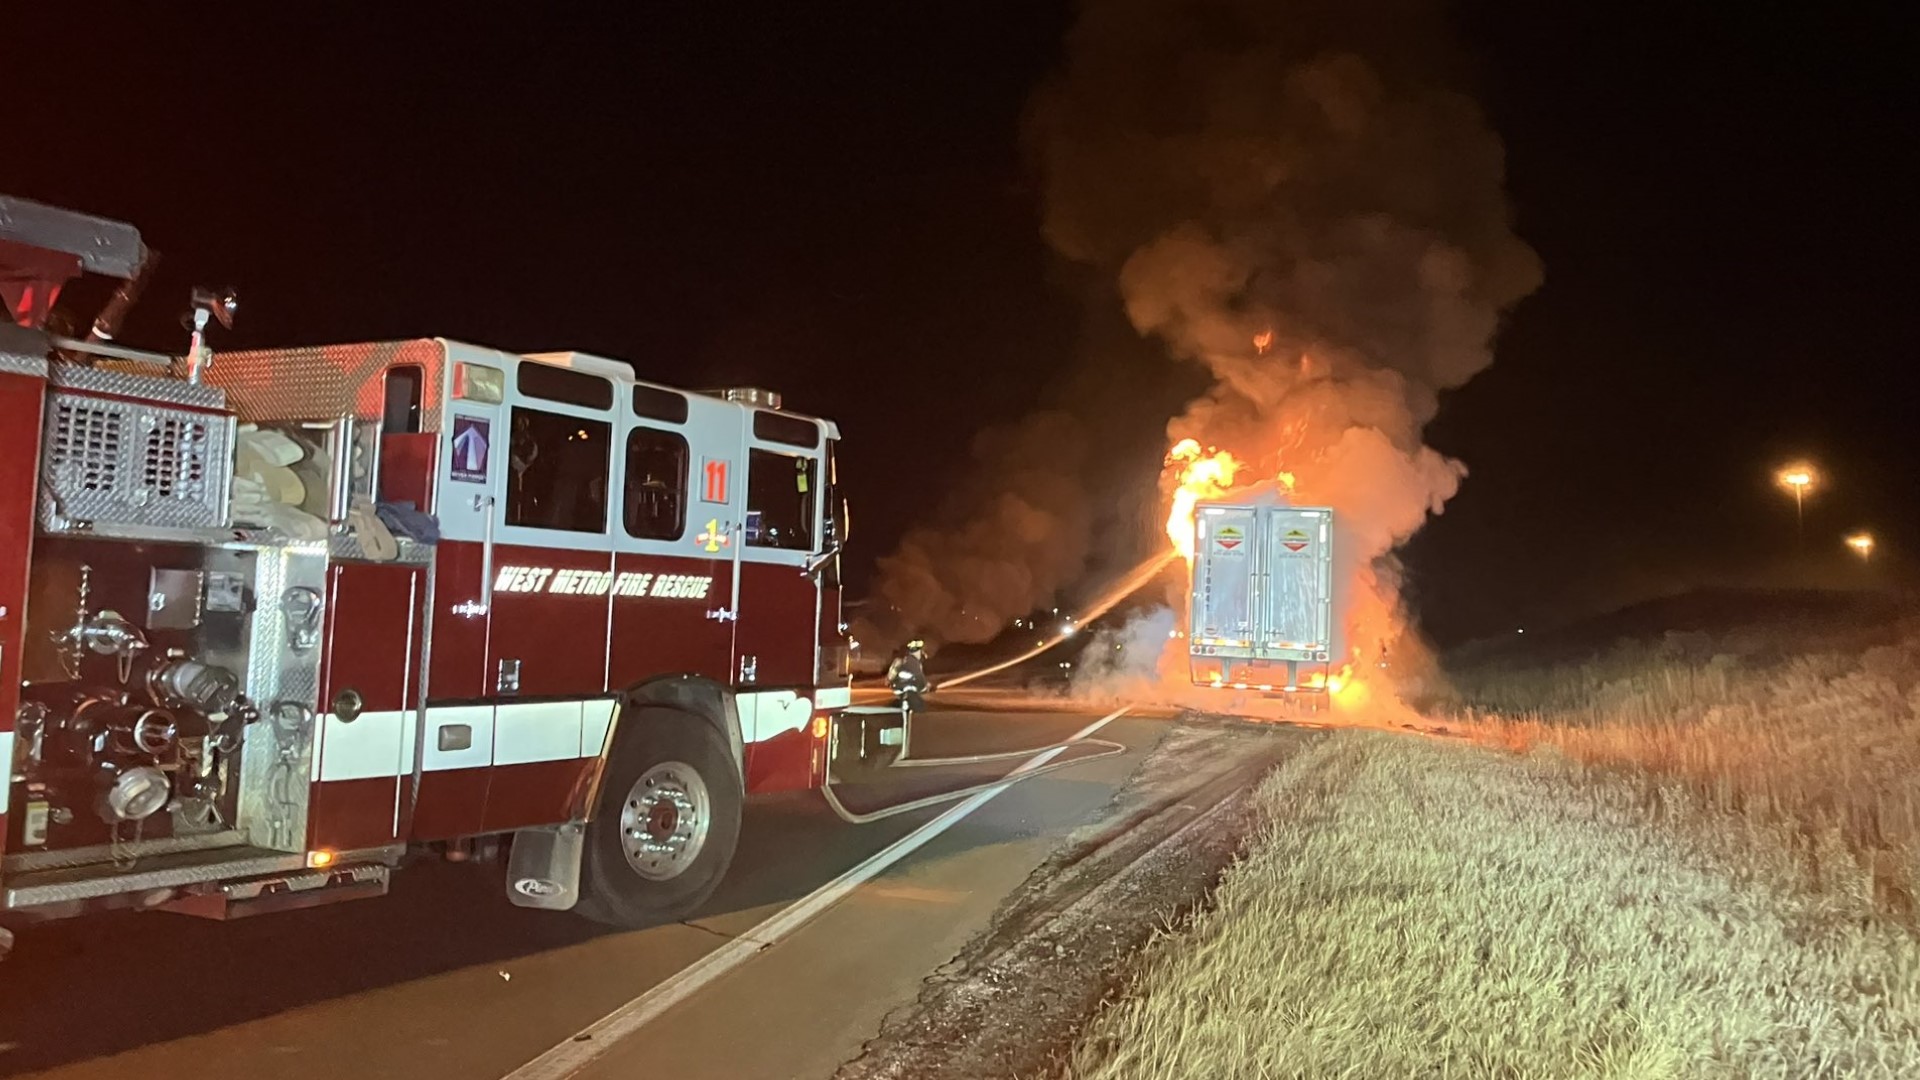 A semi truck full of food caught fire Wednesday morning on the southwest side of the Denver metro area.